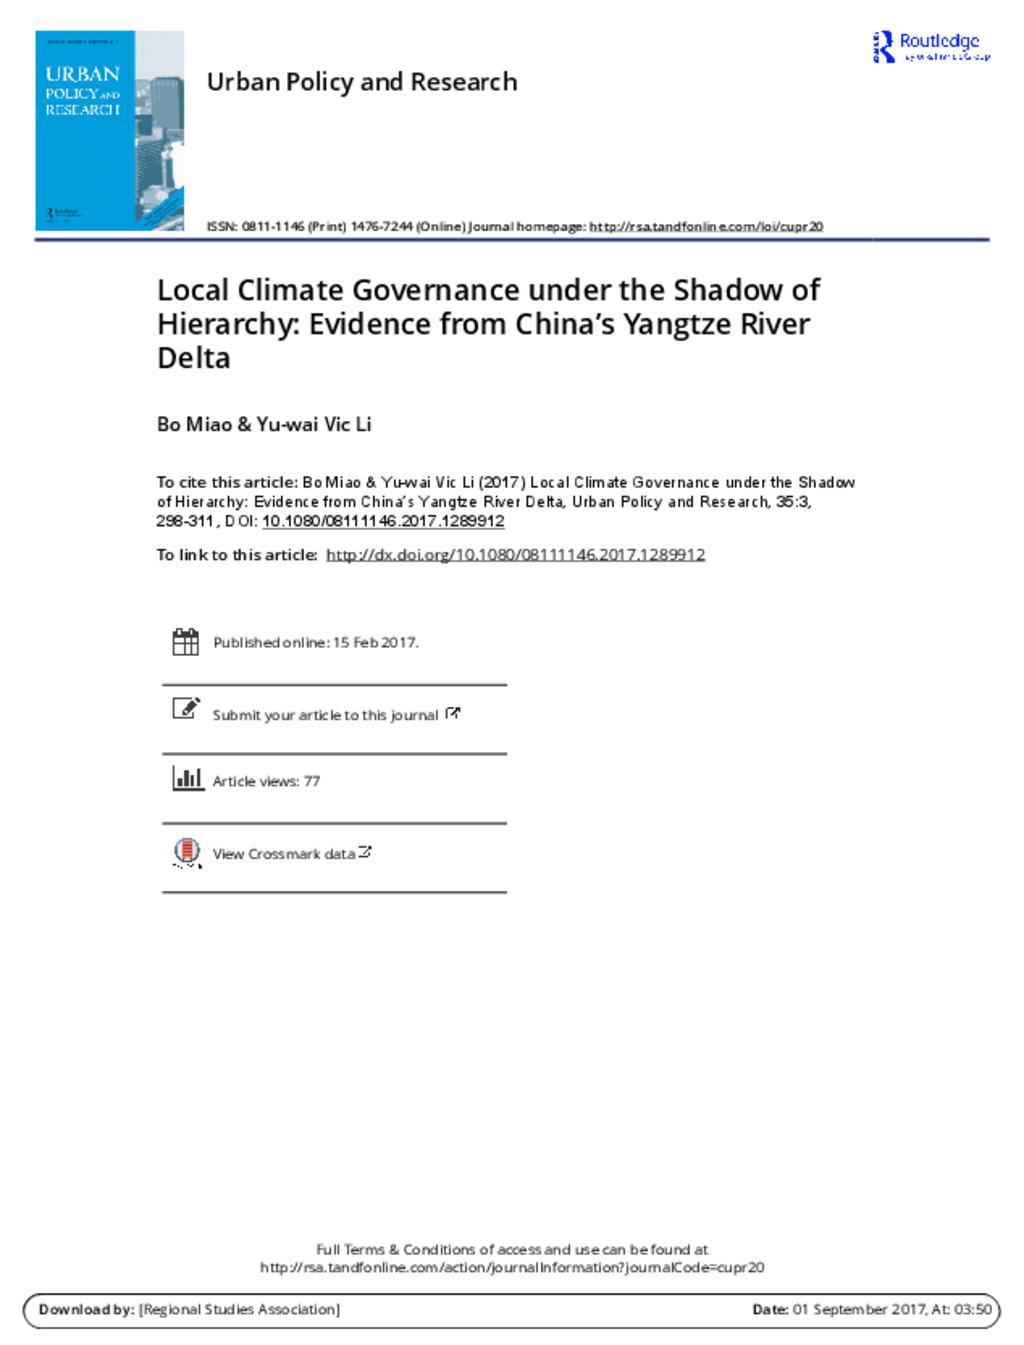 Local Climate Governance: China